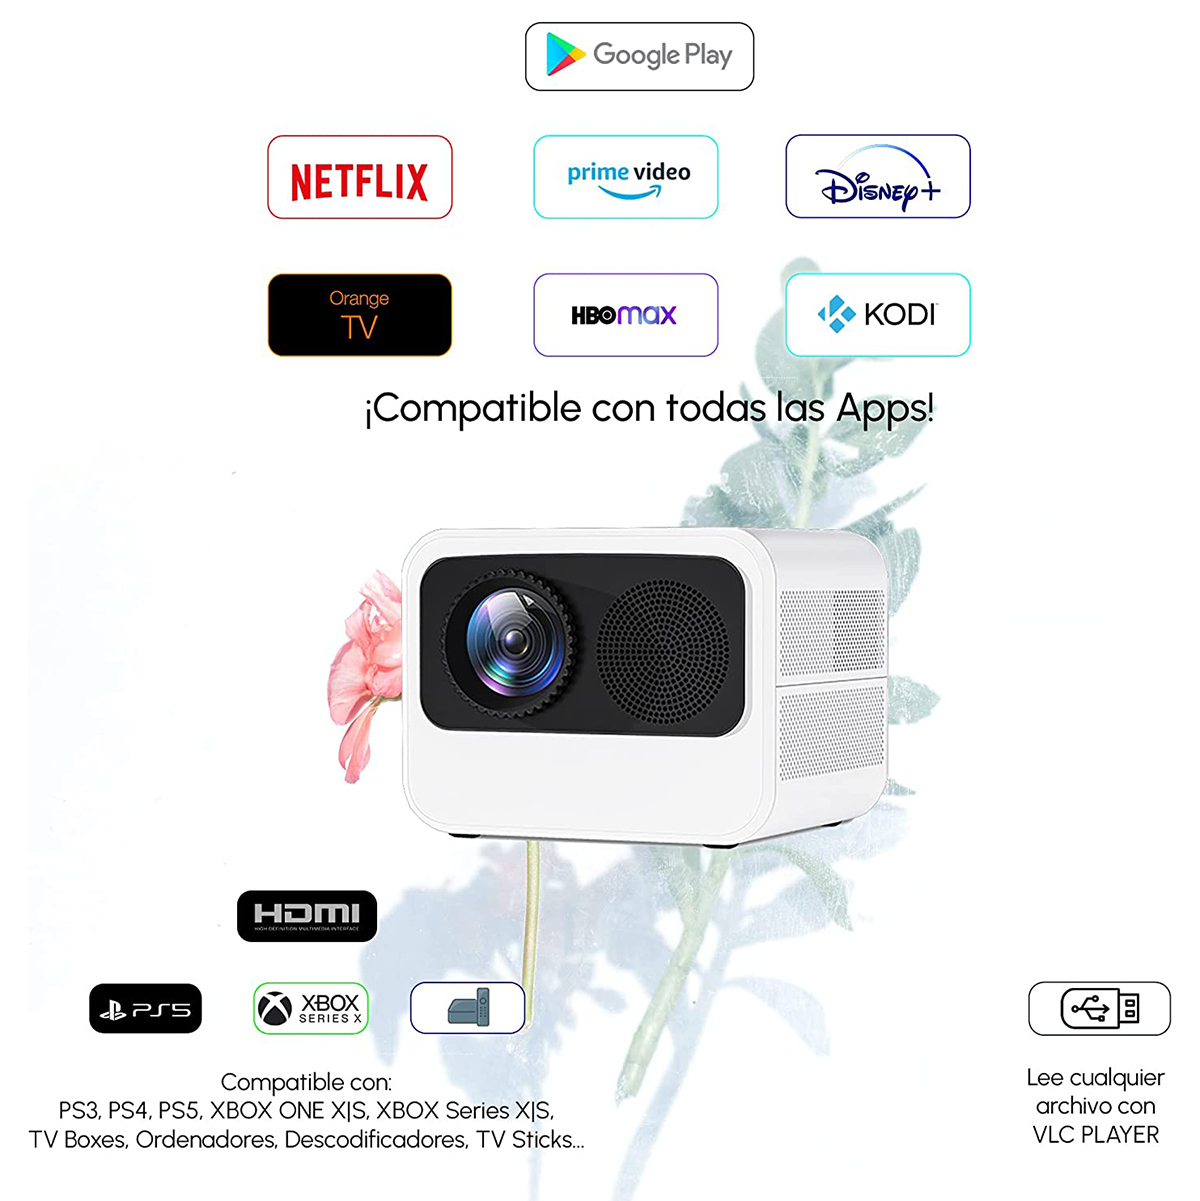 WALLACE Y6 Android PROYECTOR 4K, Beamer(HDR 9500 Lumen)